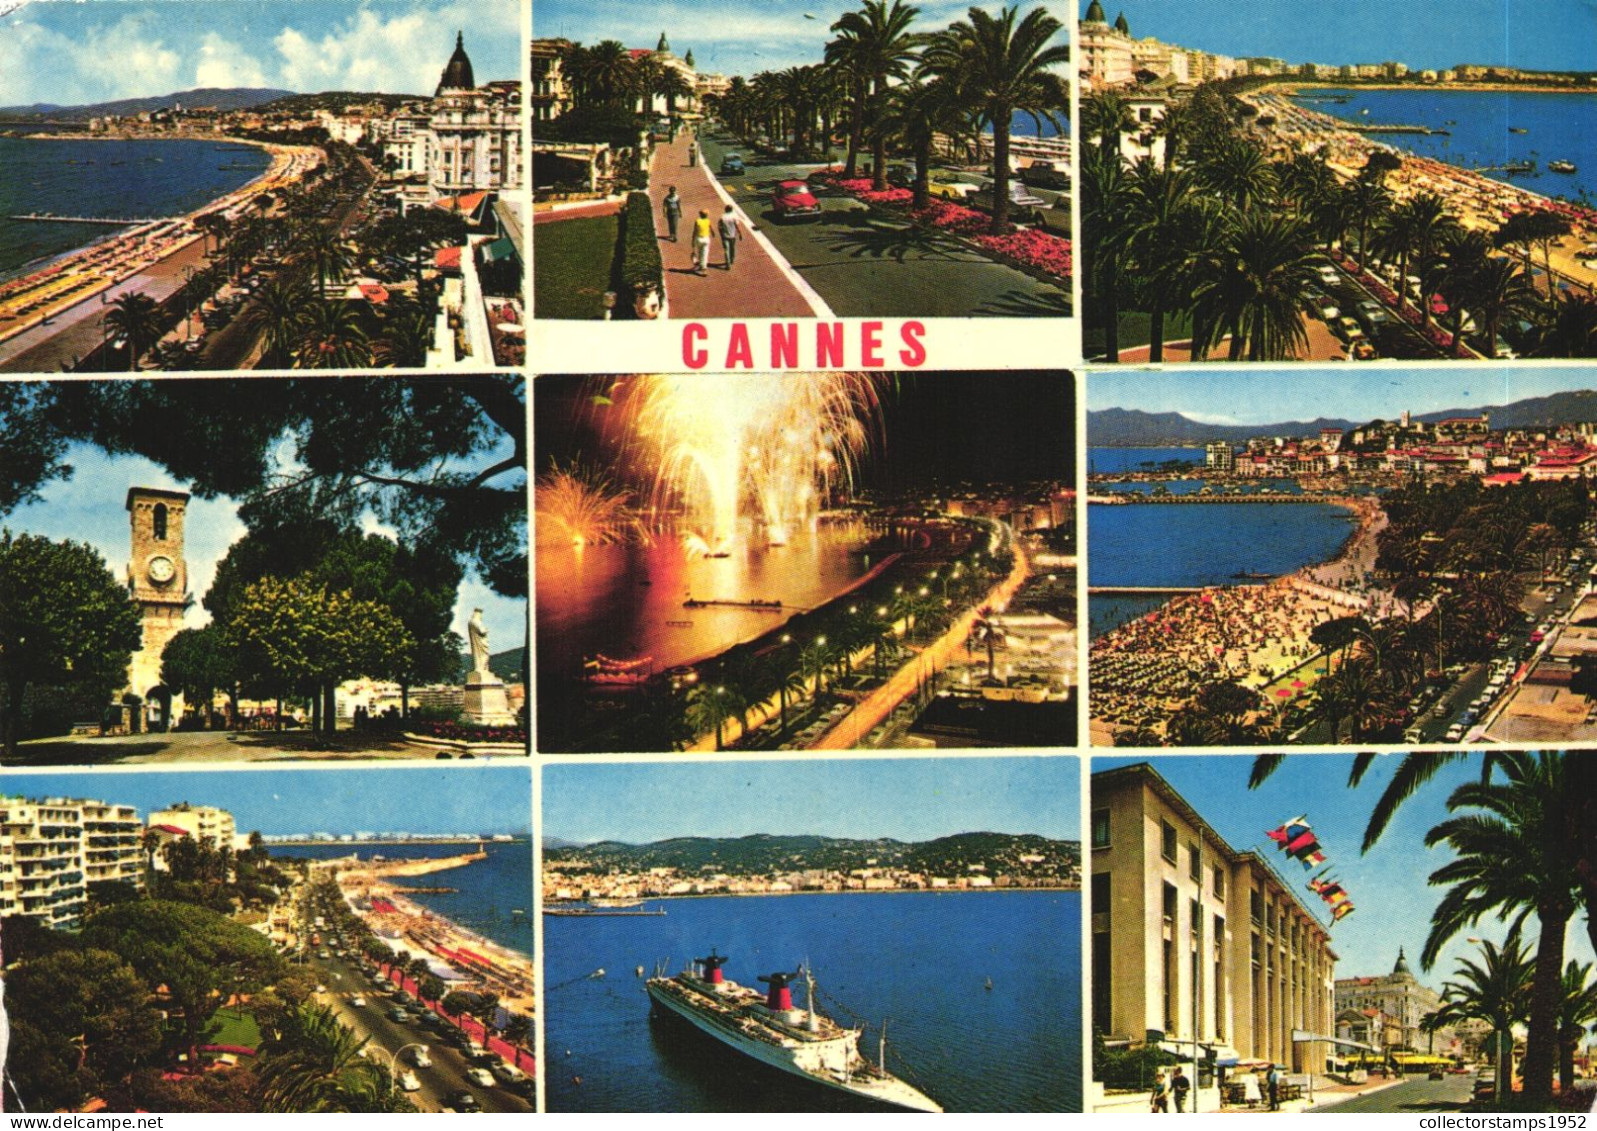 CANNES, ALPES MARITIMES, MULTIPLE VIEWS, BEACH, TOWER WITH CLOCK, CARS, SHIP, FLAGS, FIREWORKS, PARK, FRANCE, POSTCARD - Cannes